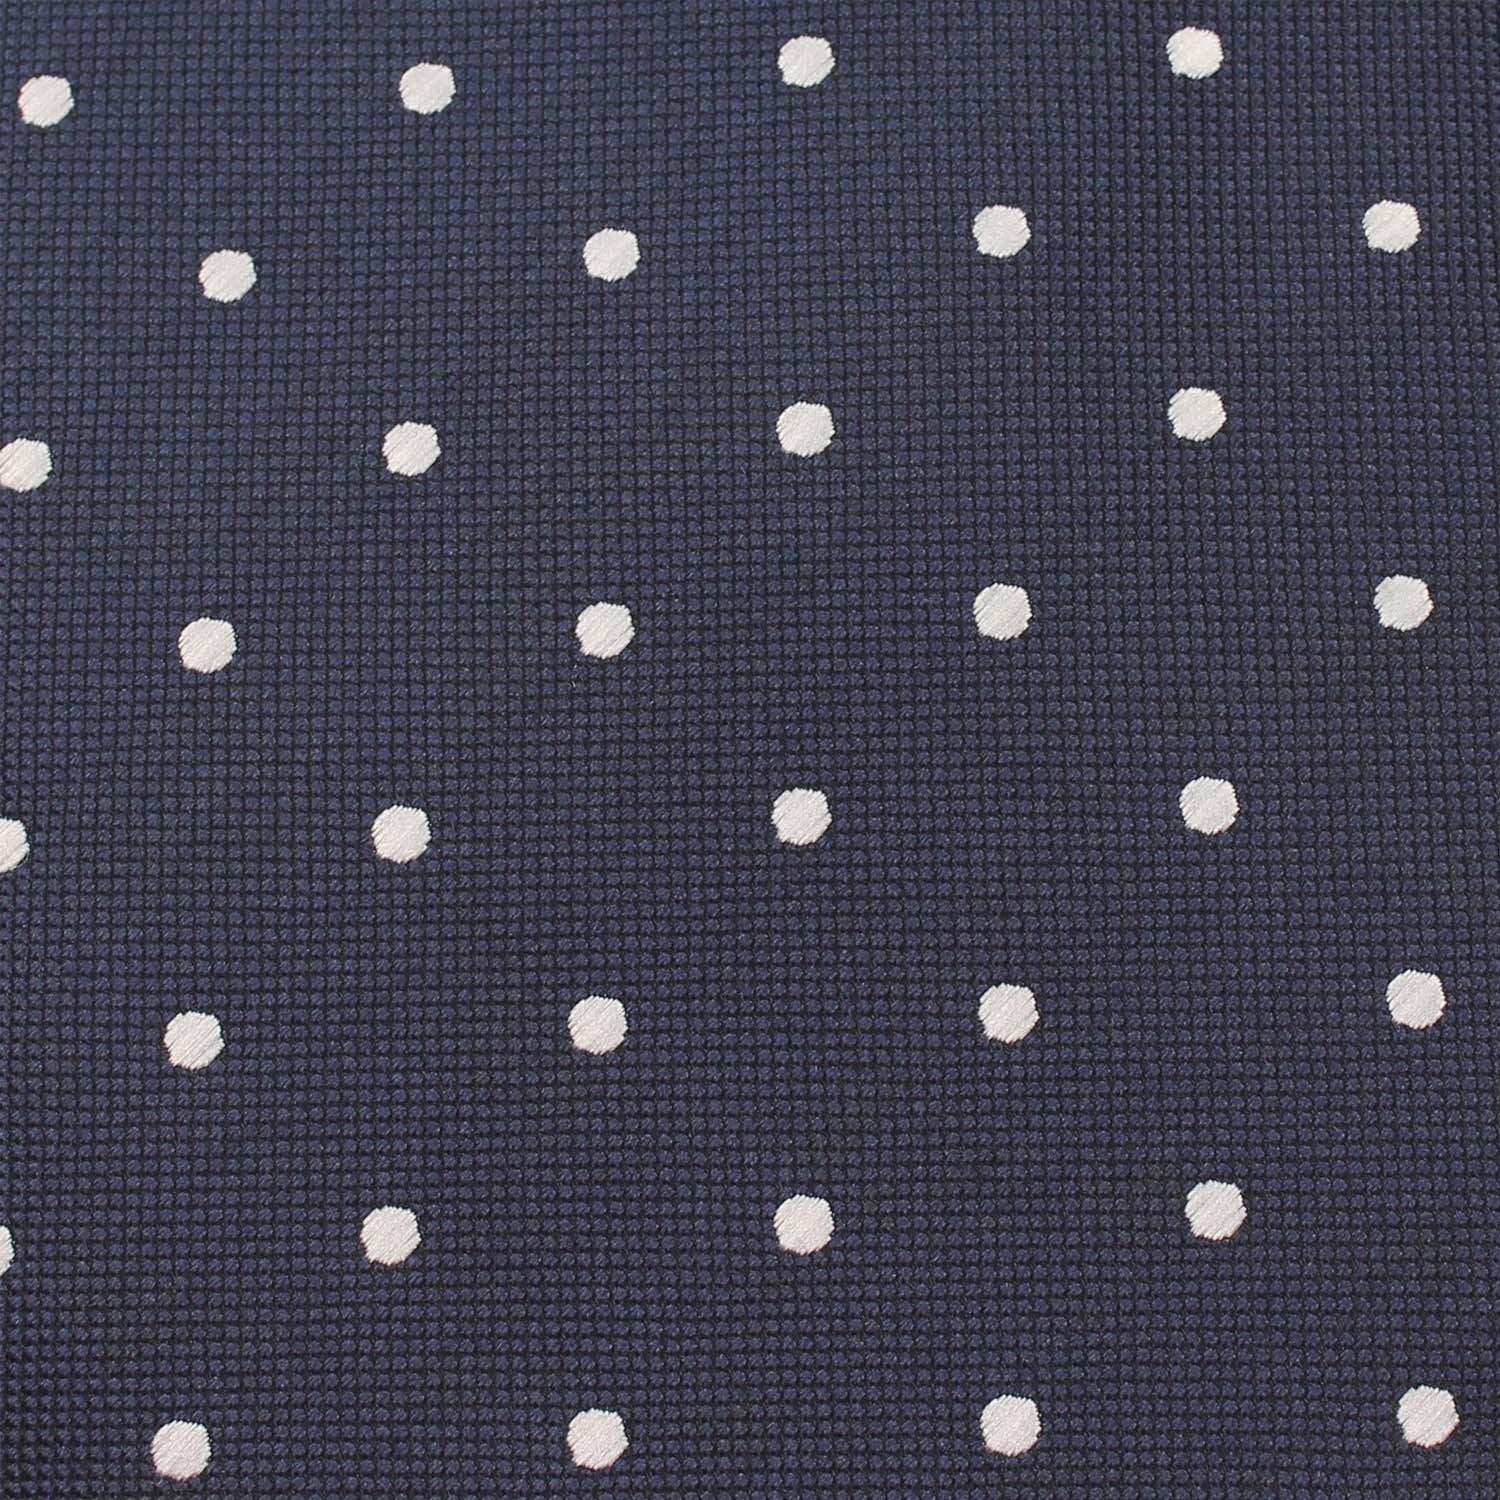 Navy Blue with White Polka Dots Fabric Pocket Square X325